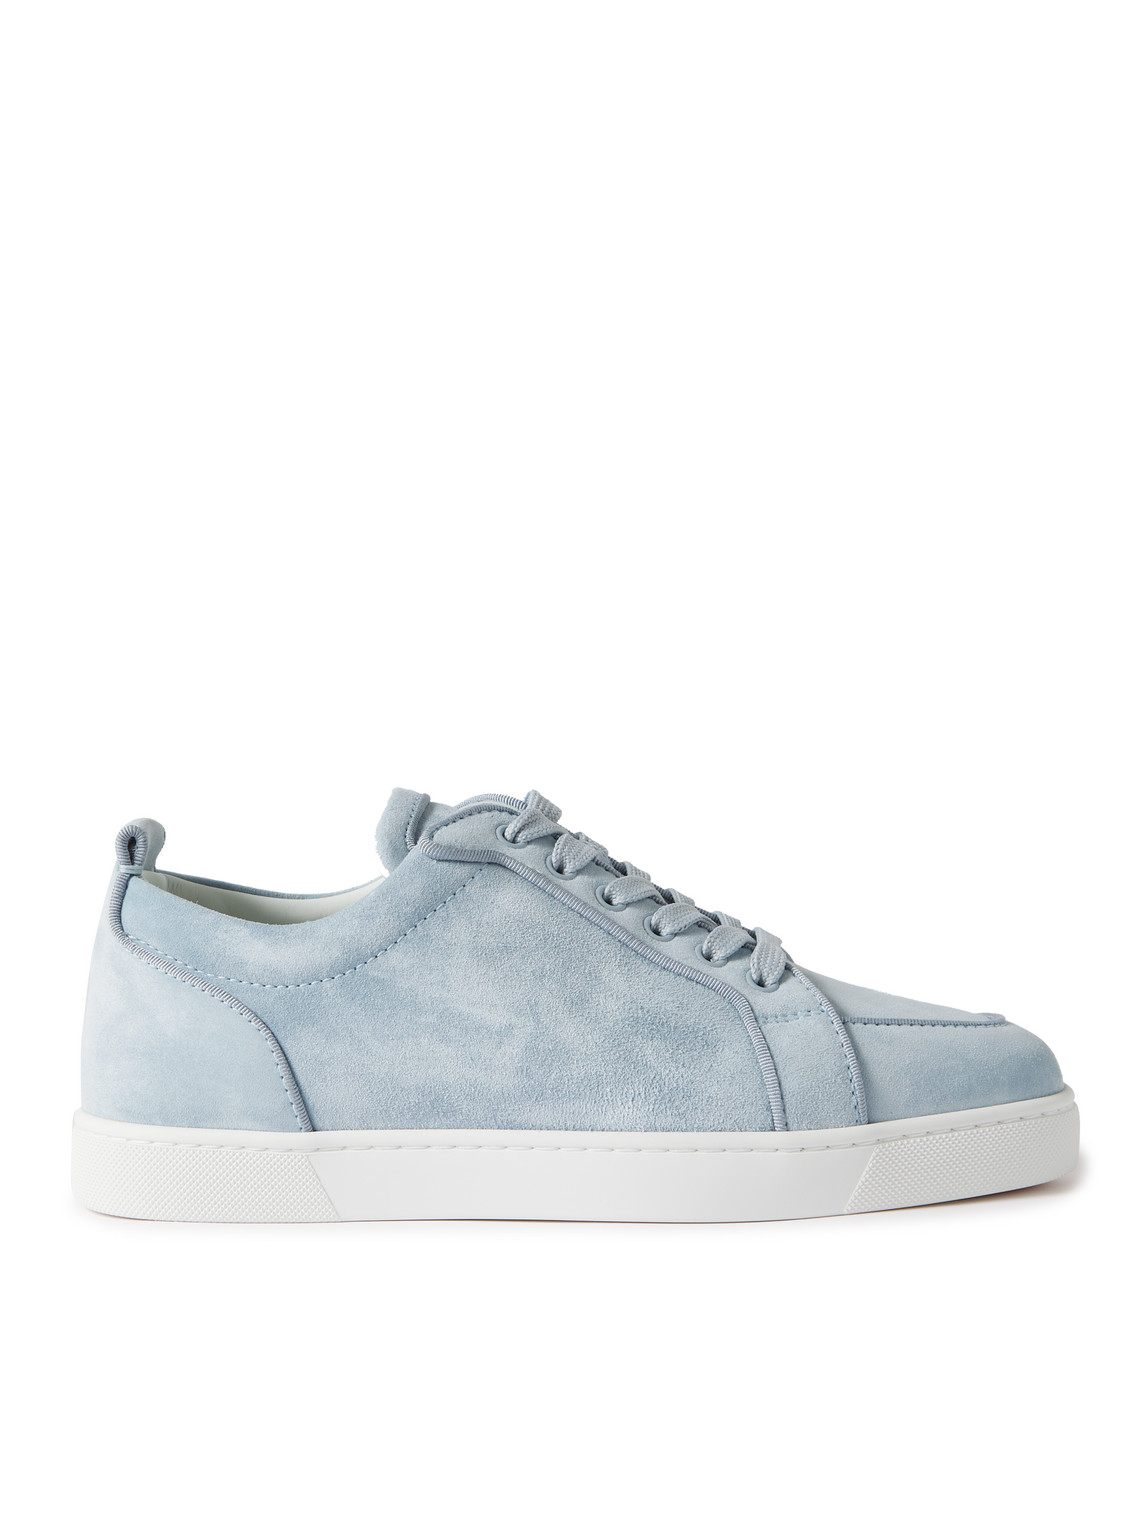 Christian Louboutin Rantulow Suede Sneakers In Blue